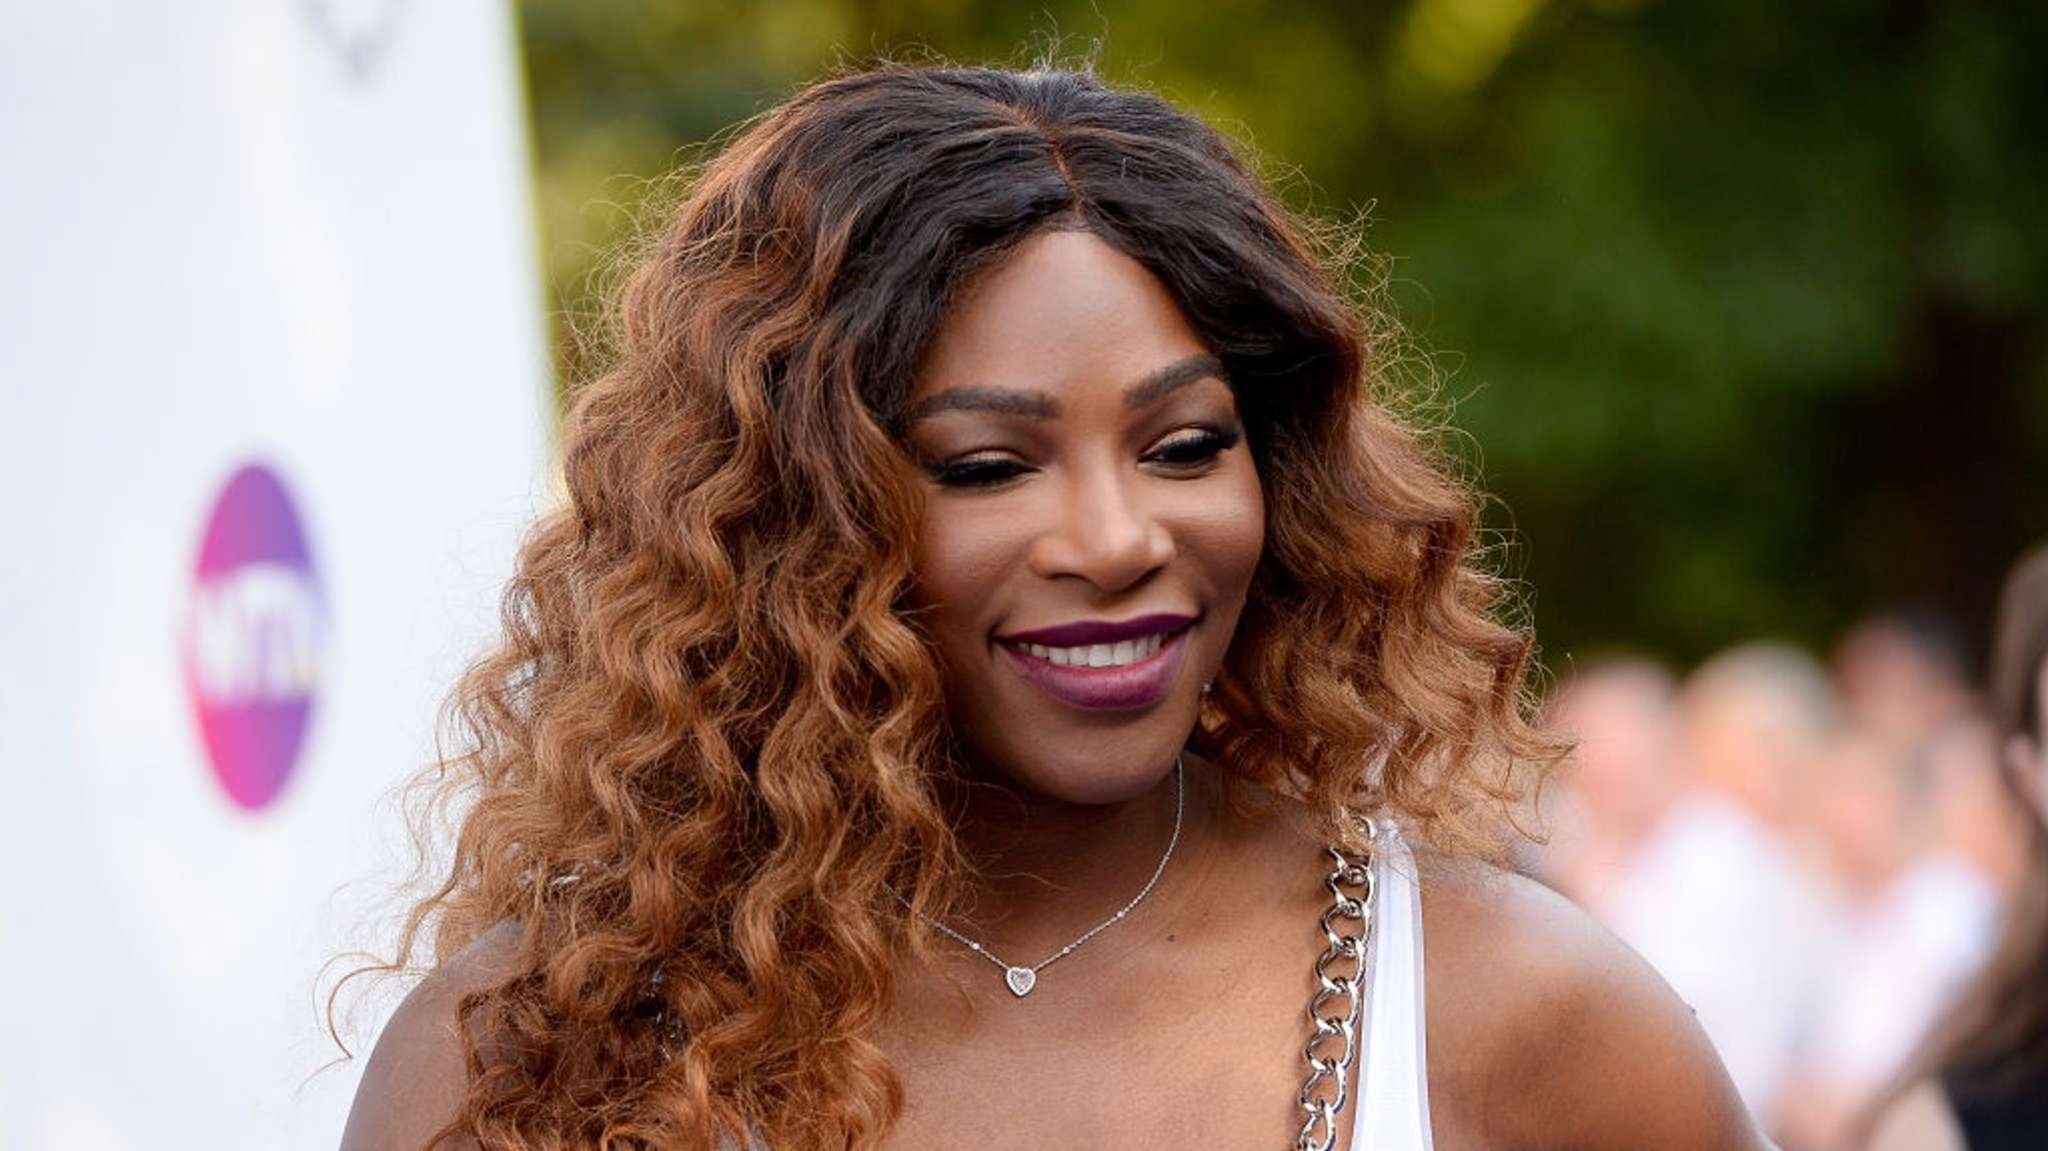 Serena Williams Rocks Fishnets And A Teal Romper At The ...